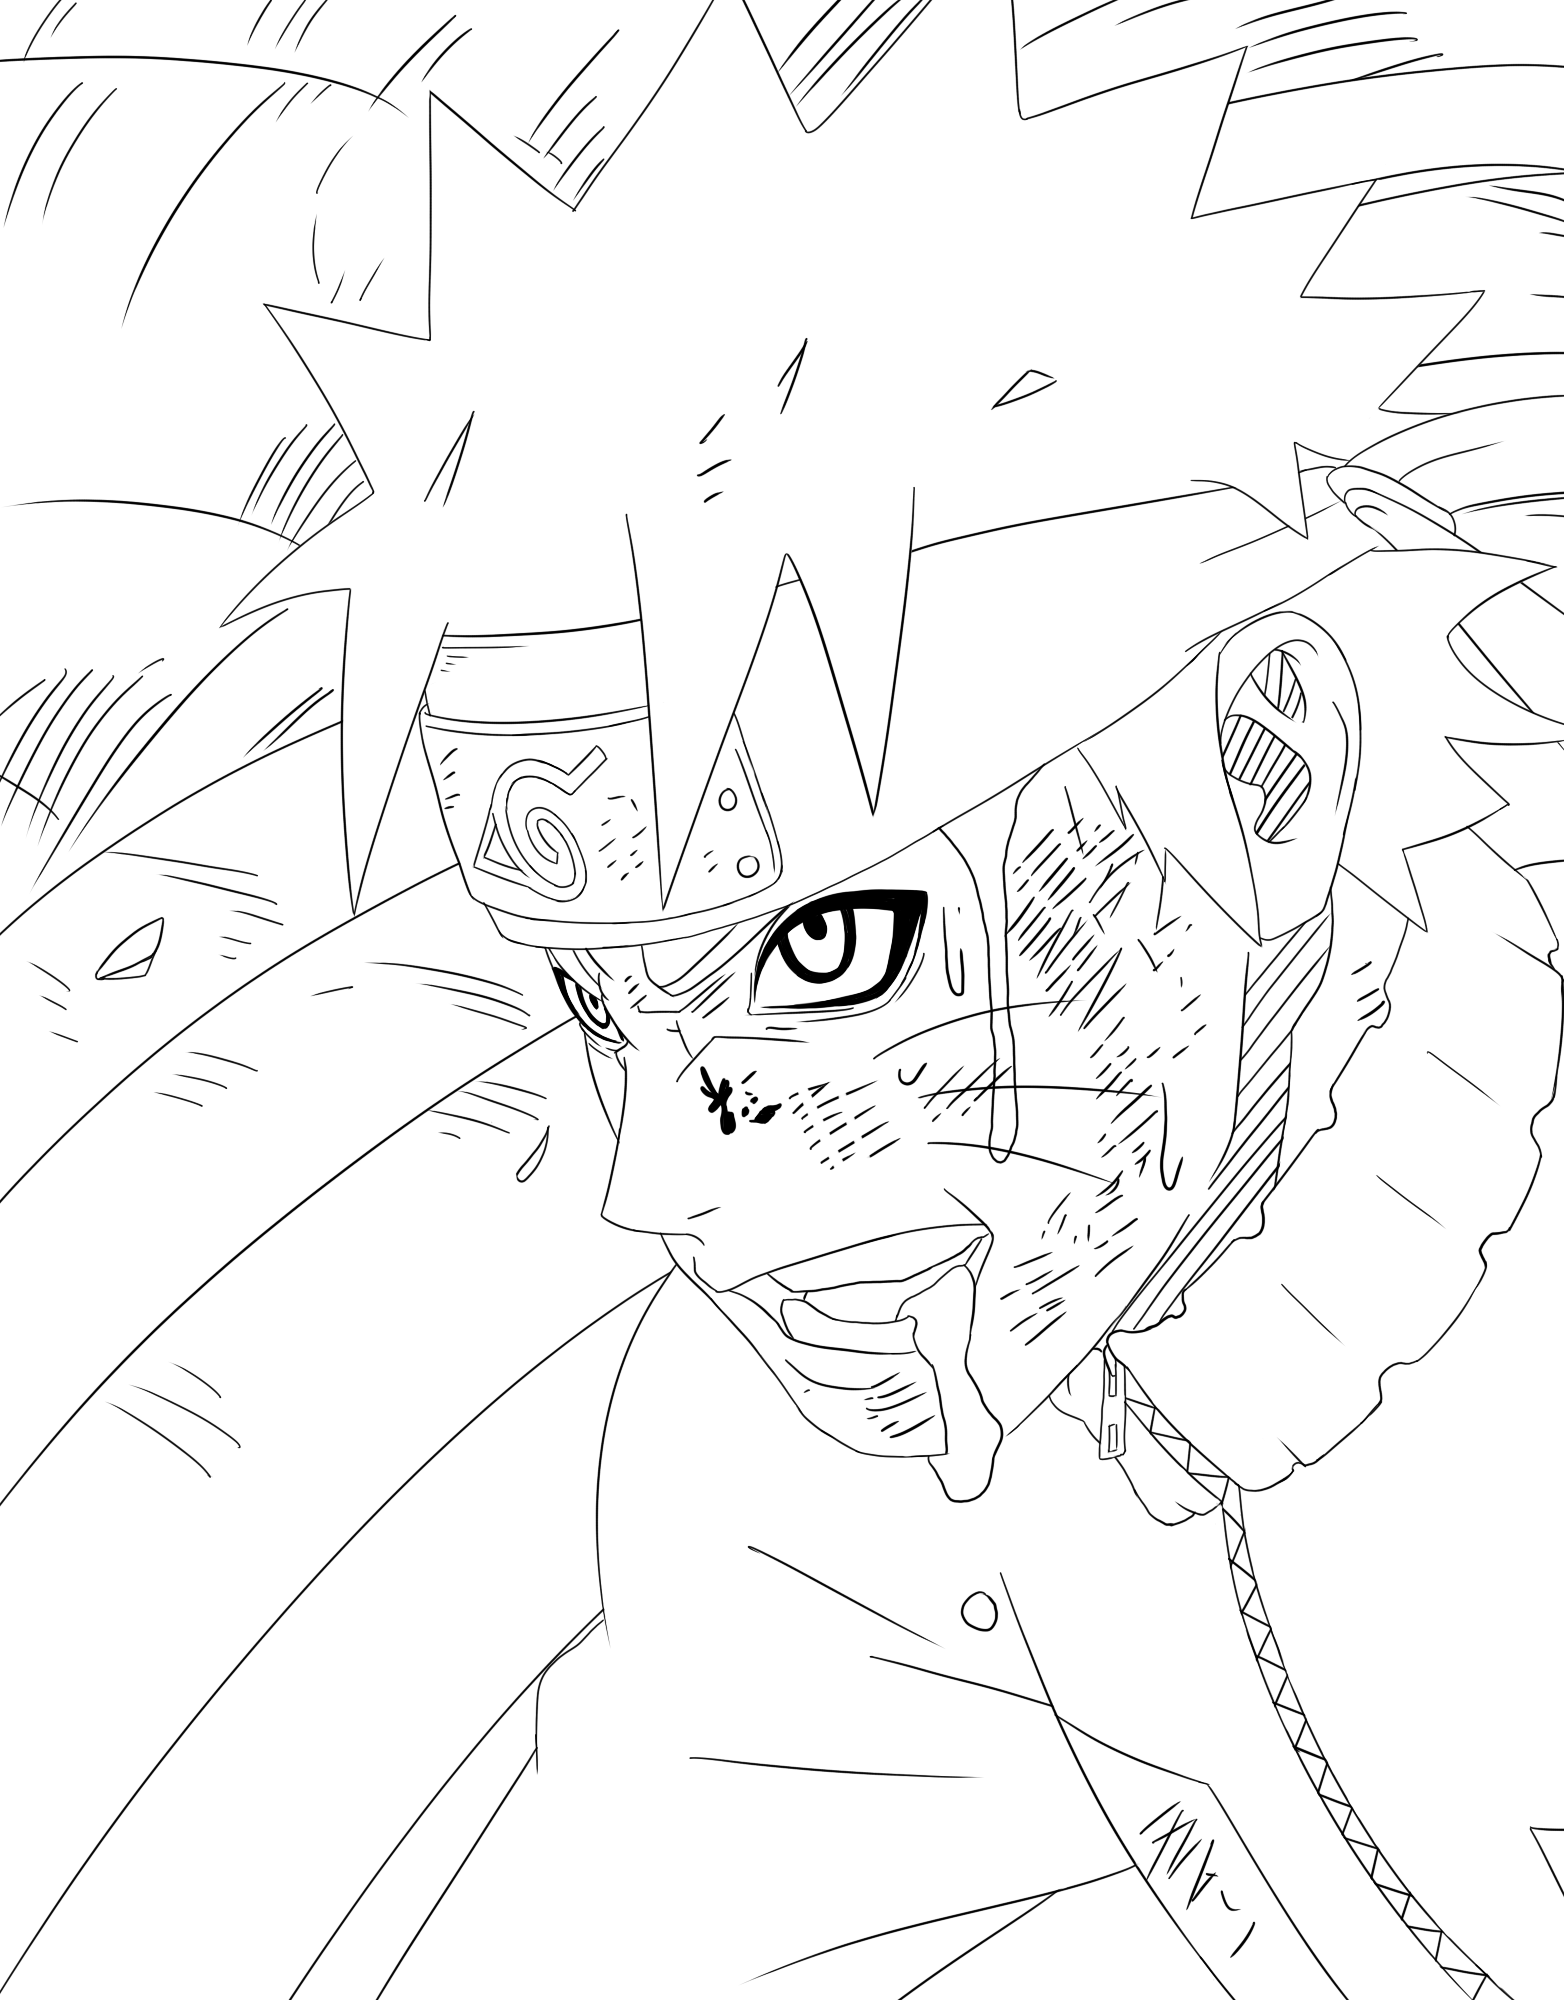 Drawing Naruto Face With Horizontal Lines by DrawingTimeWithMe on DeviantArt